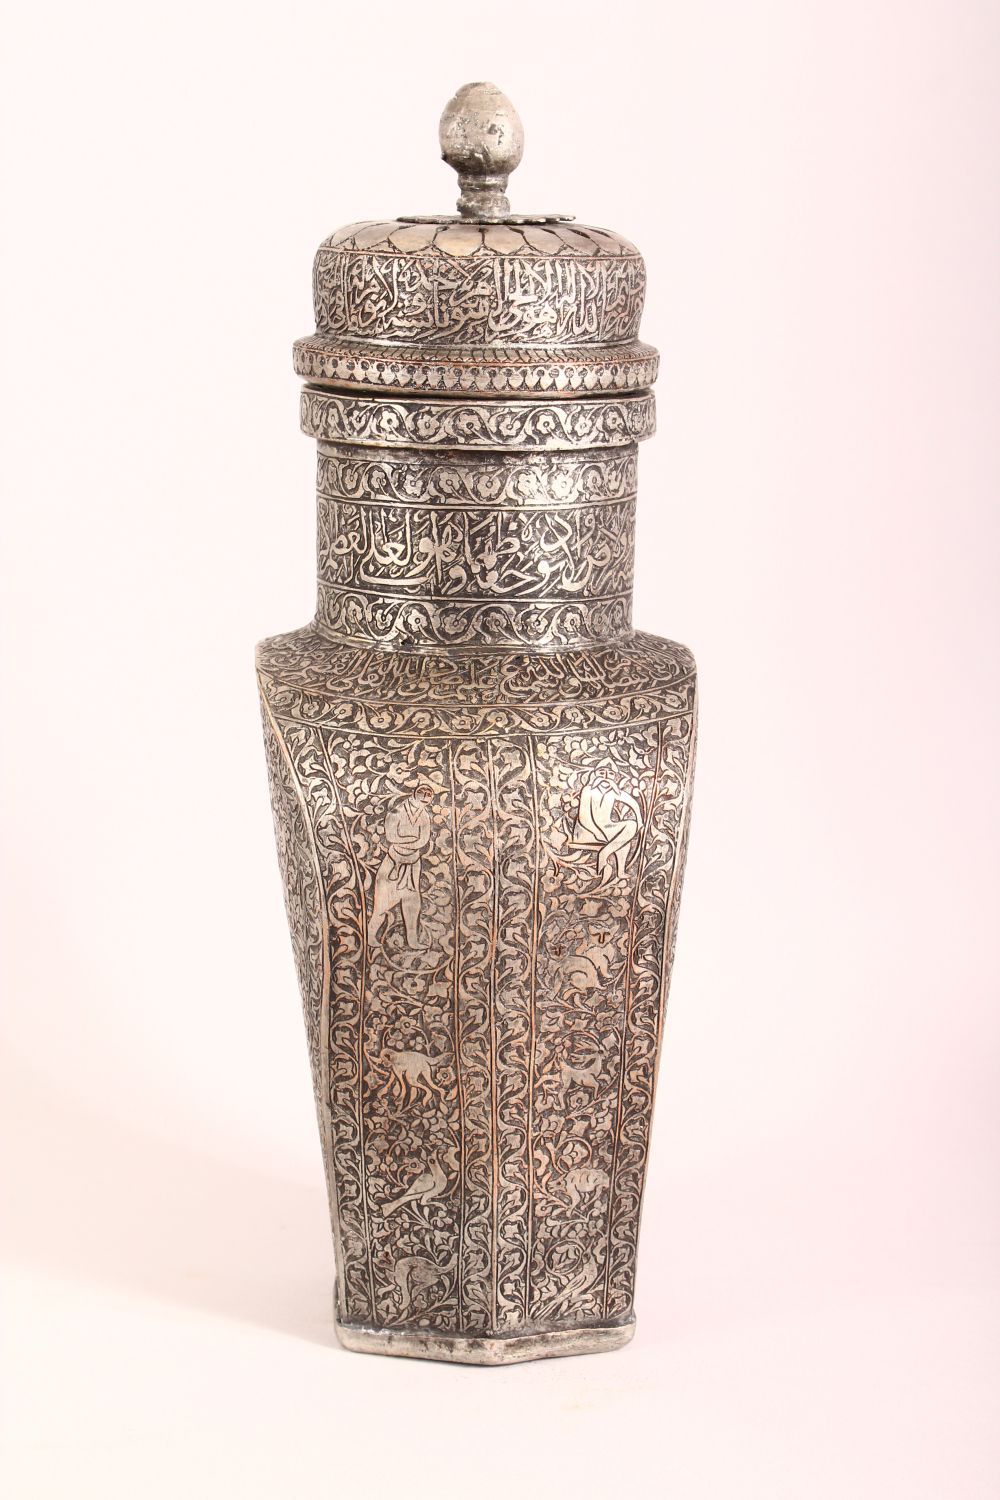 A GOOD PERSIAN TINNED COPPER LIDDED URN - the body carved with figures, animals and flora, with a - Image 3 of 8